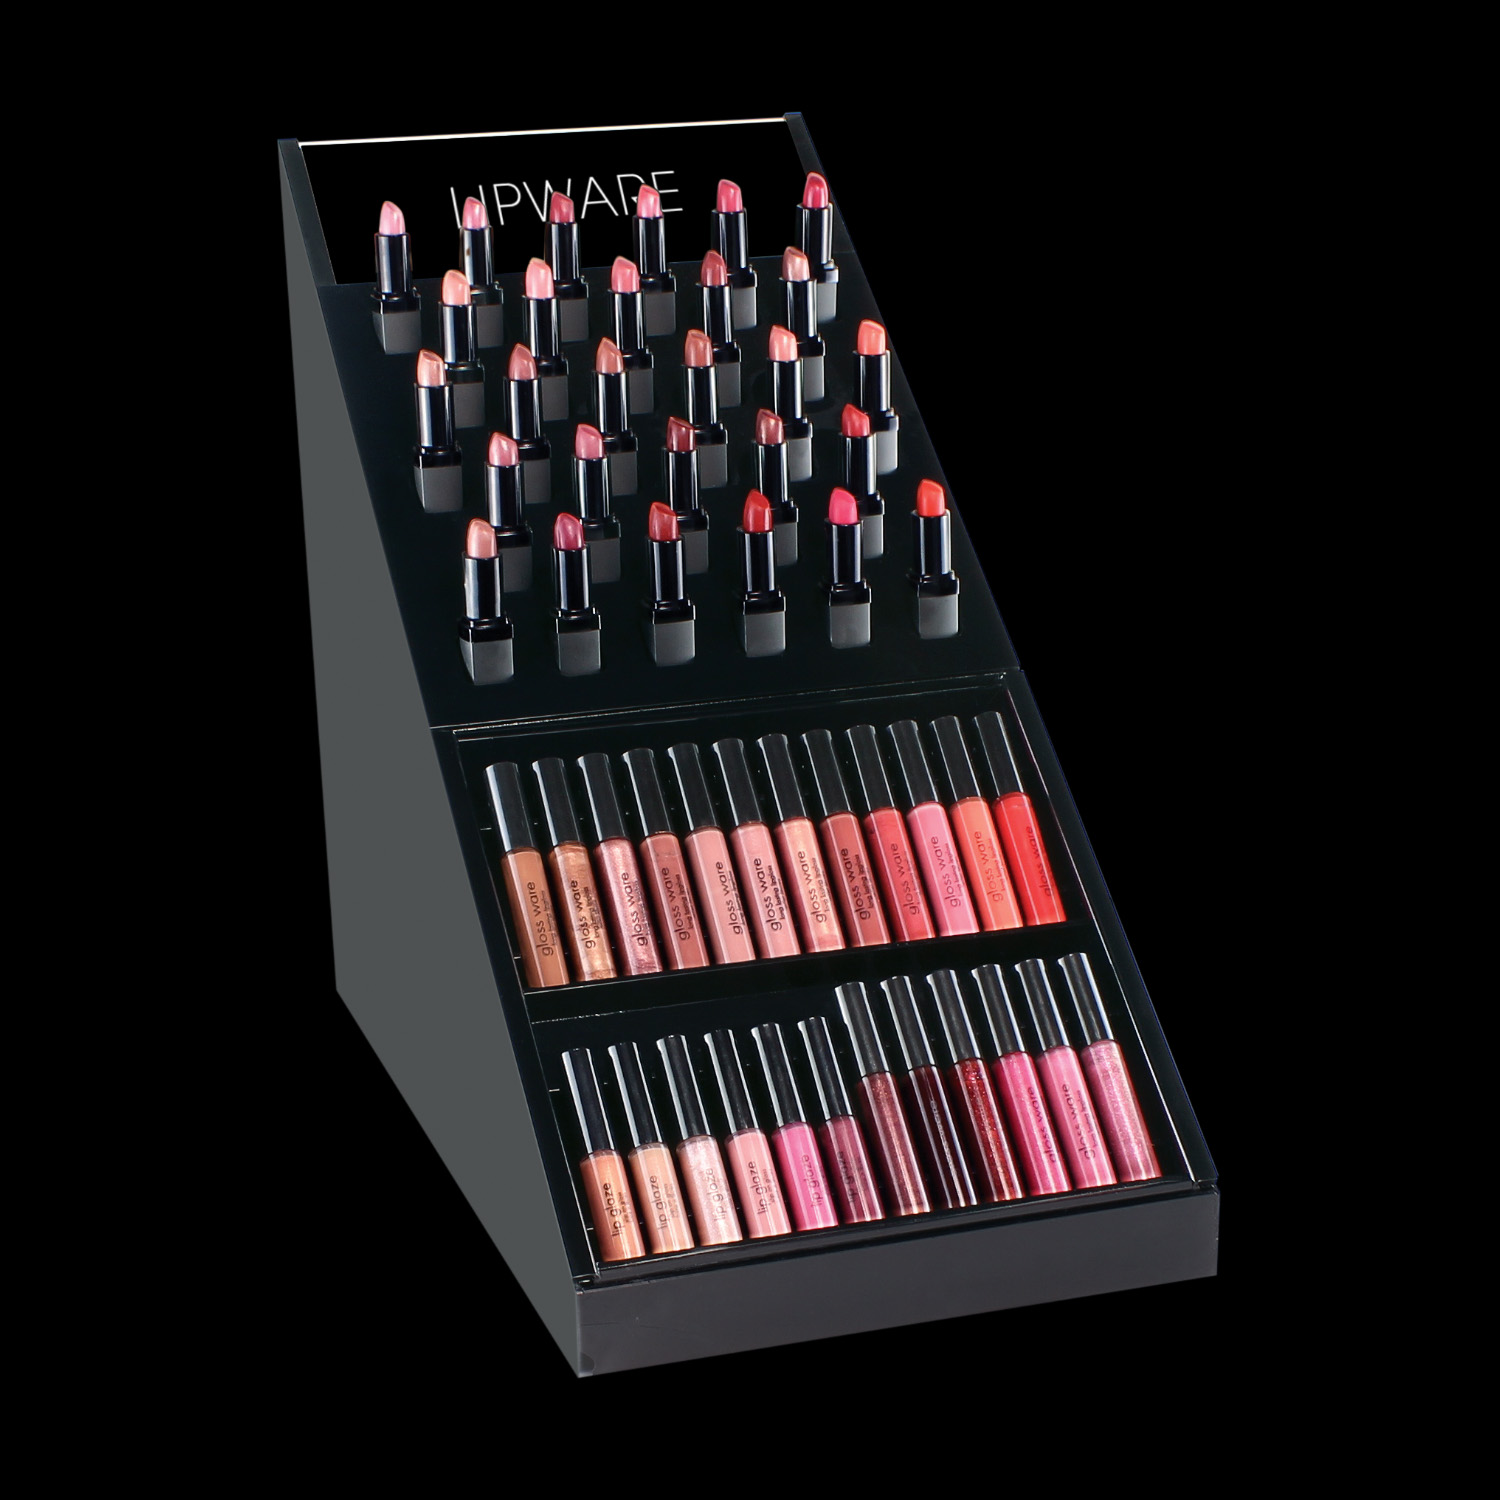 Classic packaging Visionary lip displays to create an exquisite retail environment with ease